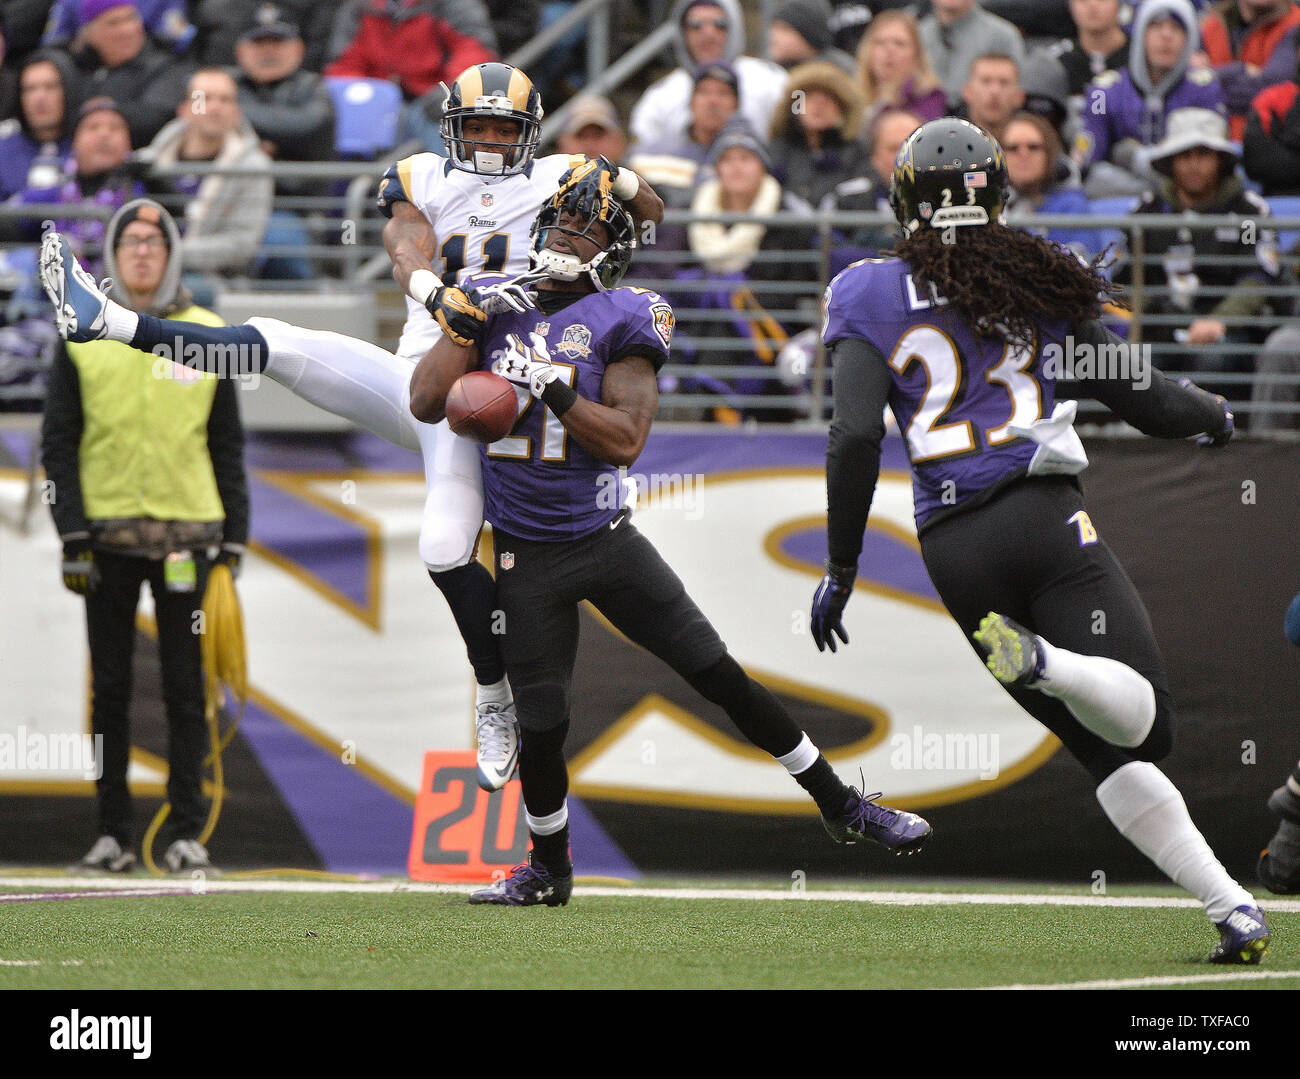 St. Louis Rams wide receiver Tavon Austin (11) can't bring in a catch as Baltimore Ravens cornerback Lardarius Webb (21) provides coverage in the first quarter at M&T Bank Stadium in Baltimore, Maryland on November 22, 2015. Photo by Kevin Dietsch/UPI Stock Photo